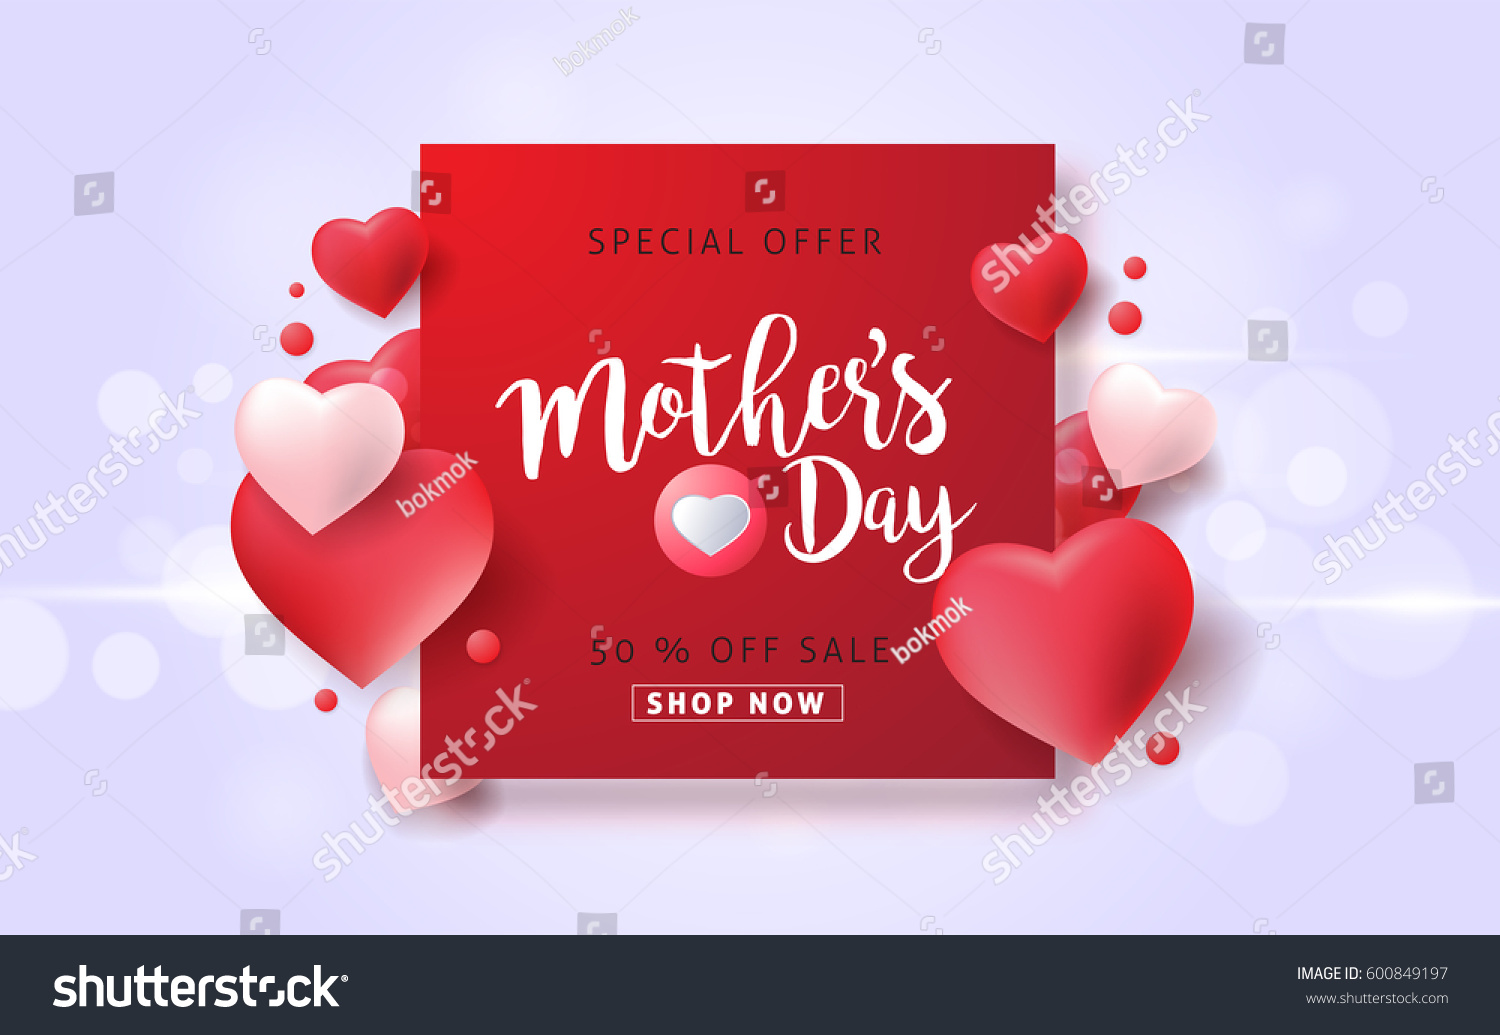 Mothers day sale background layout with Heart Shaped Balloons for banners,Wallpaper,flyers, invitation, posters, brochure, voucher discount.Vector illustration template. #600849197